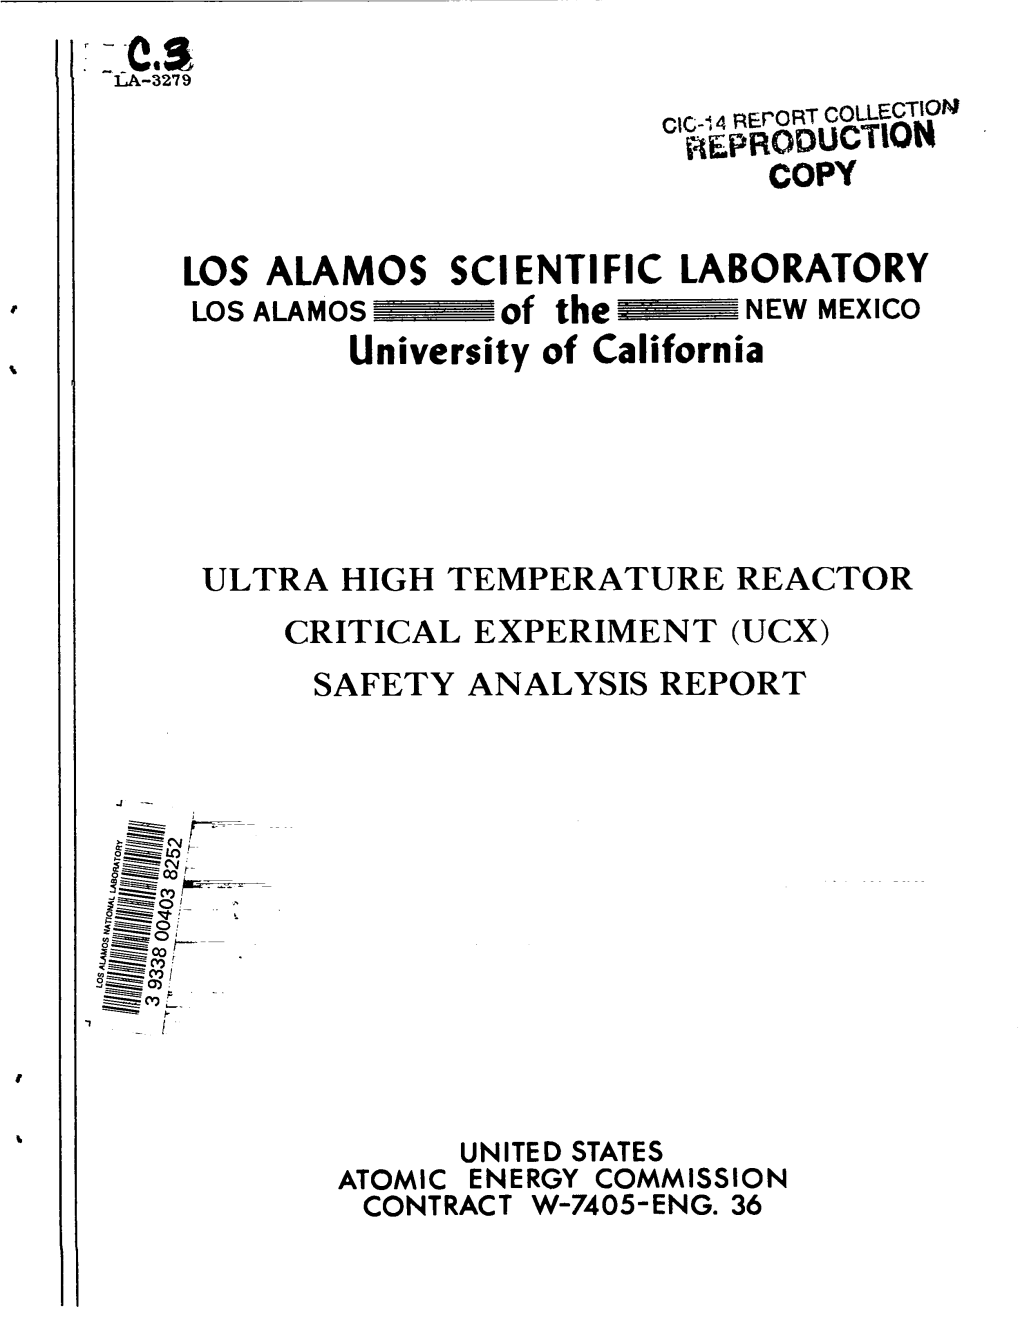 Ultra High Temperature Reactor Critical Experiment (Ucx) Safety Analysis Report